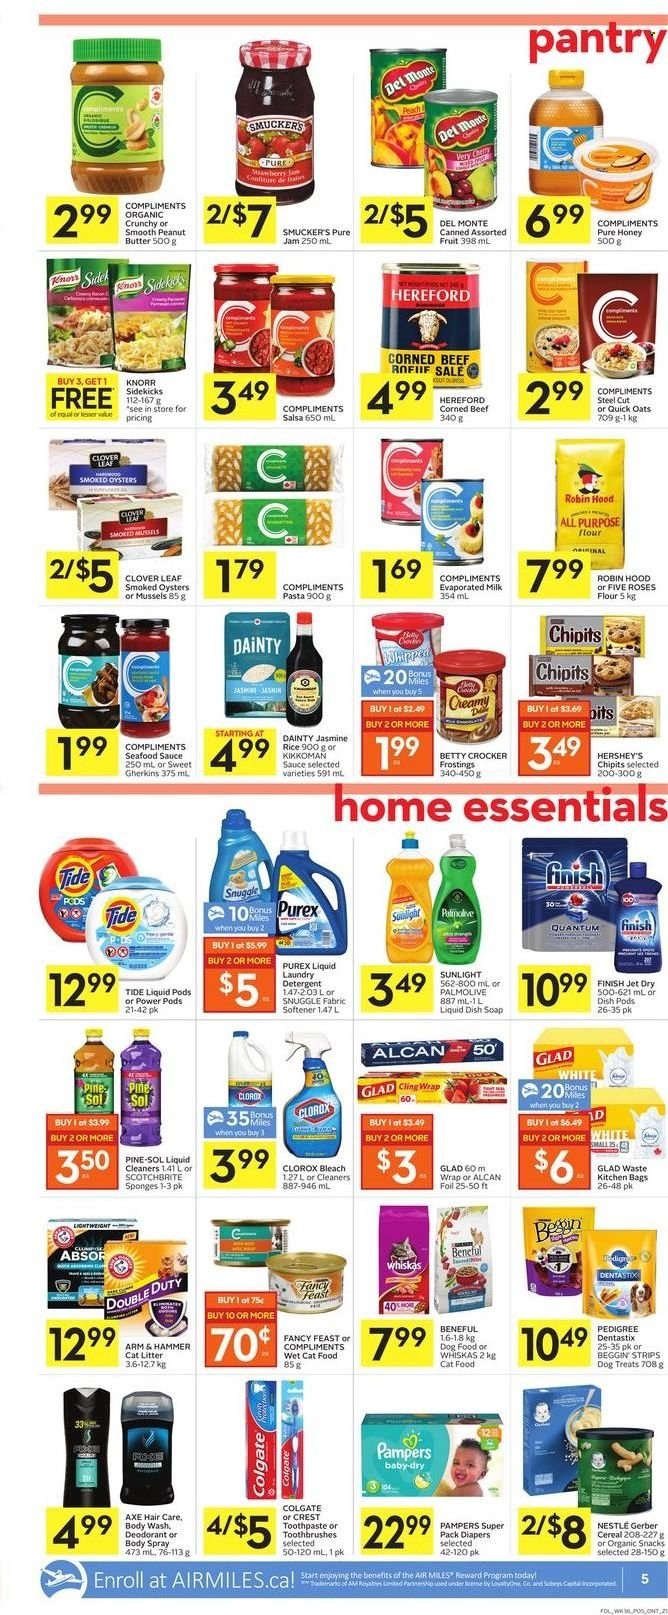 thumbnail - Foodland Flyer - December 30, 2021 - January 05, 2022 - Sales products - mussels, smoked oysters, oysters, pasta, corned beef, Clover, evaporated milk, butter, Hershey's, strips, snack, Gerber, ARM & HAMMER, flour, oats, cereals, Quick Oats, rice, jasmine rice, Kikkoman, salsa, honey, fruit jam, beef meat, Knorr, Nestlé, detergent, Colgate, Pampers, Whiskas, deodorant. Page 5.